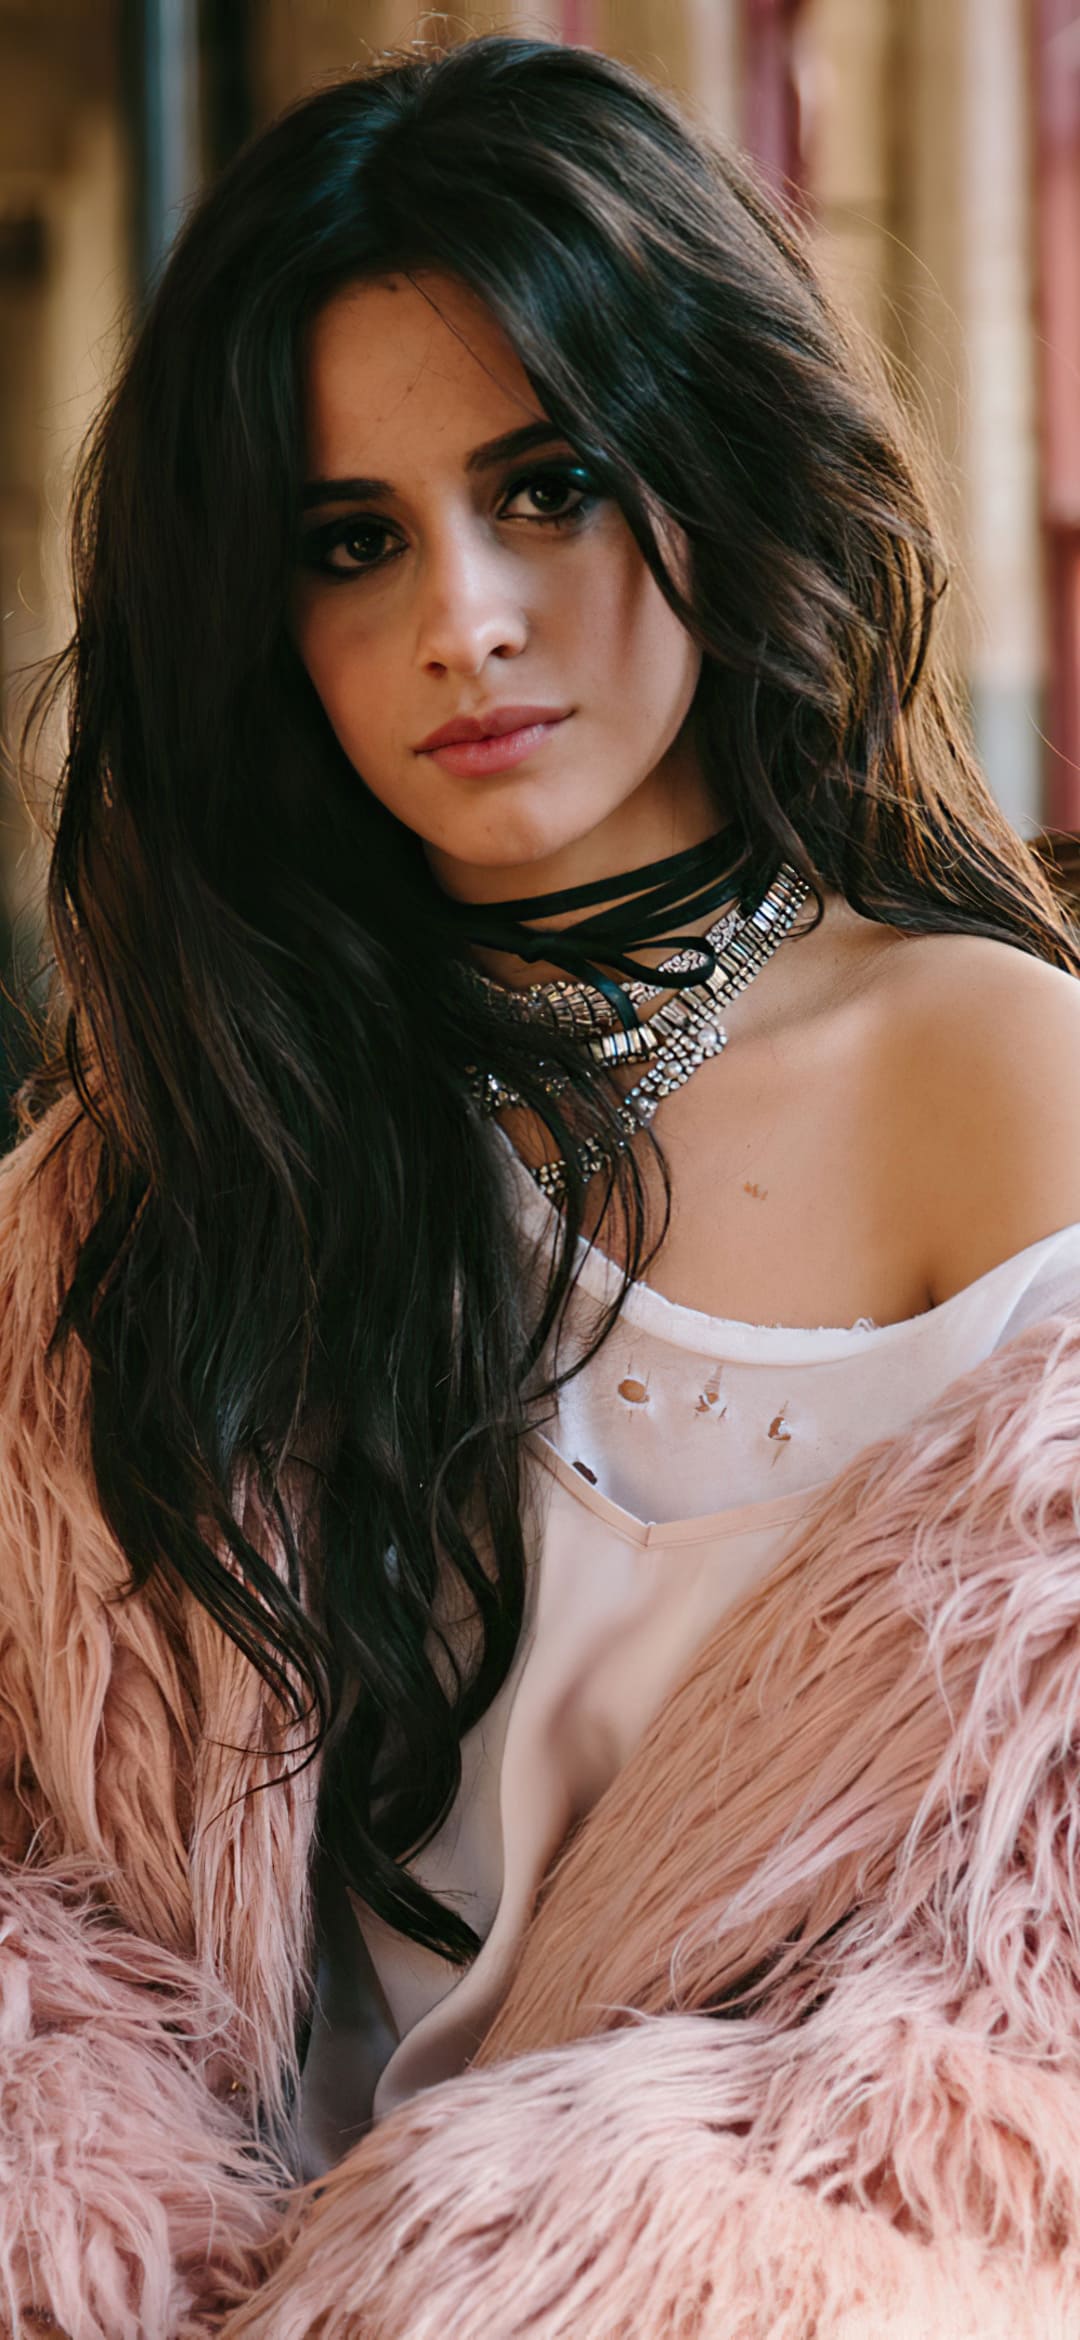 90 Camila Cabello HD Wallpapers and Backgrounds